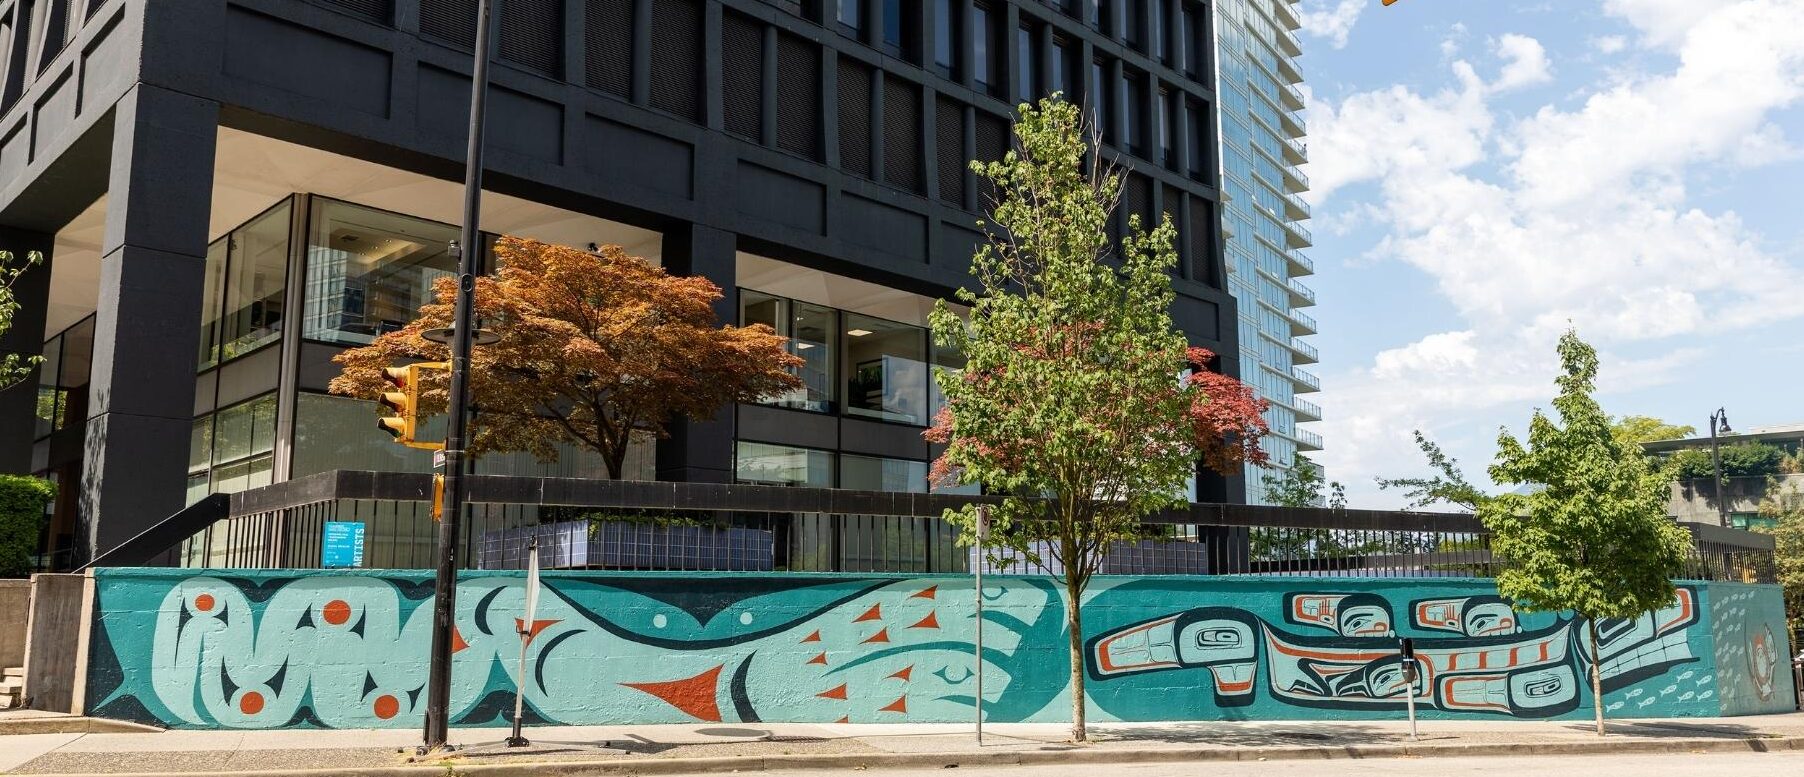 ID: Shades of blue and green if form line art features whale, otter and euchalon fishes on long sidewalk wall.